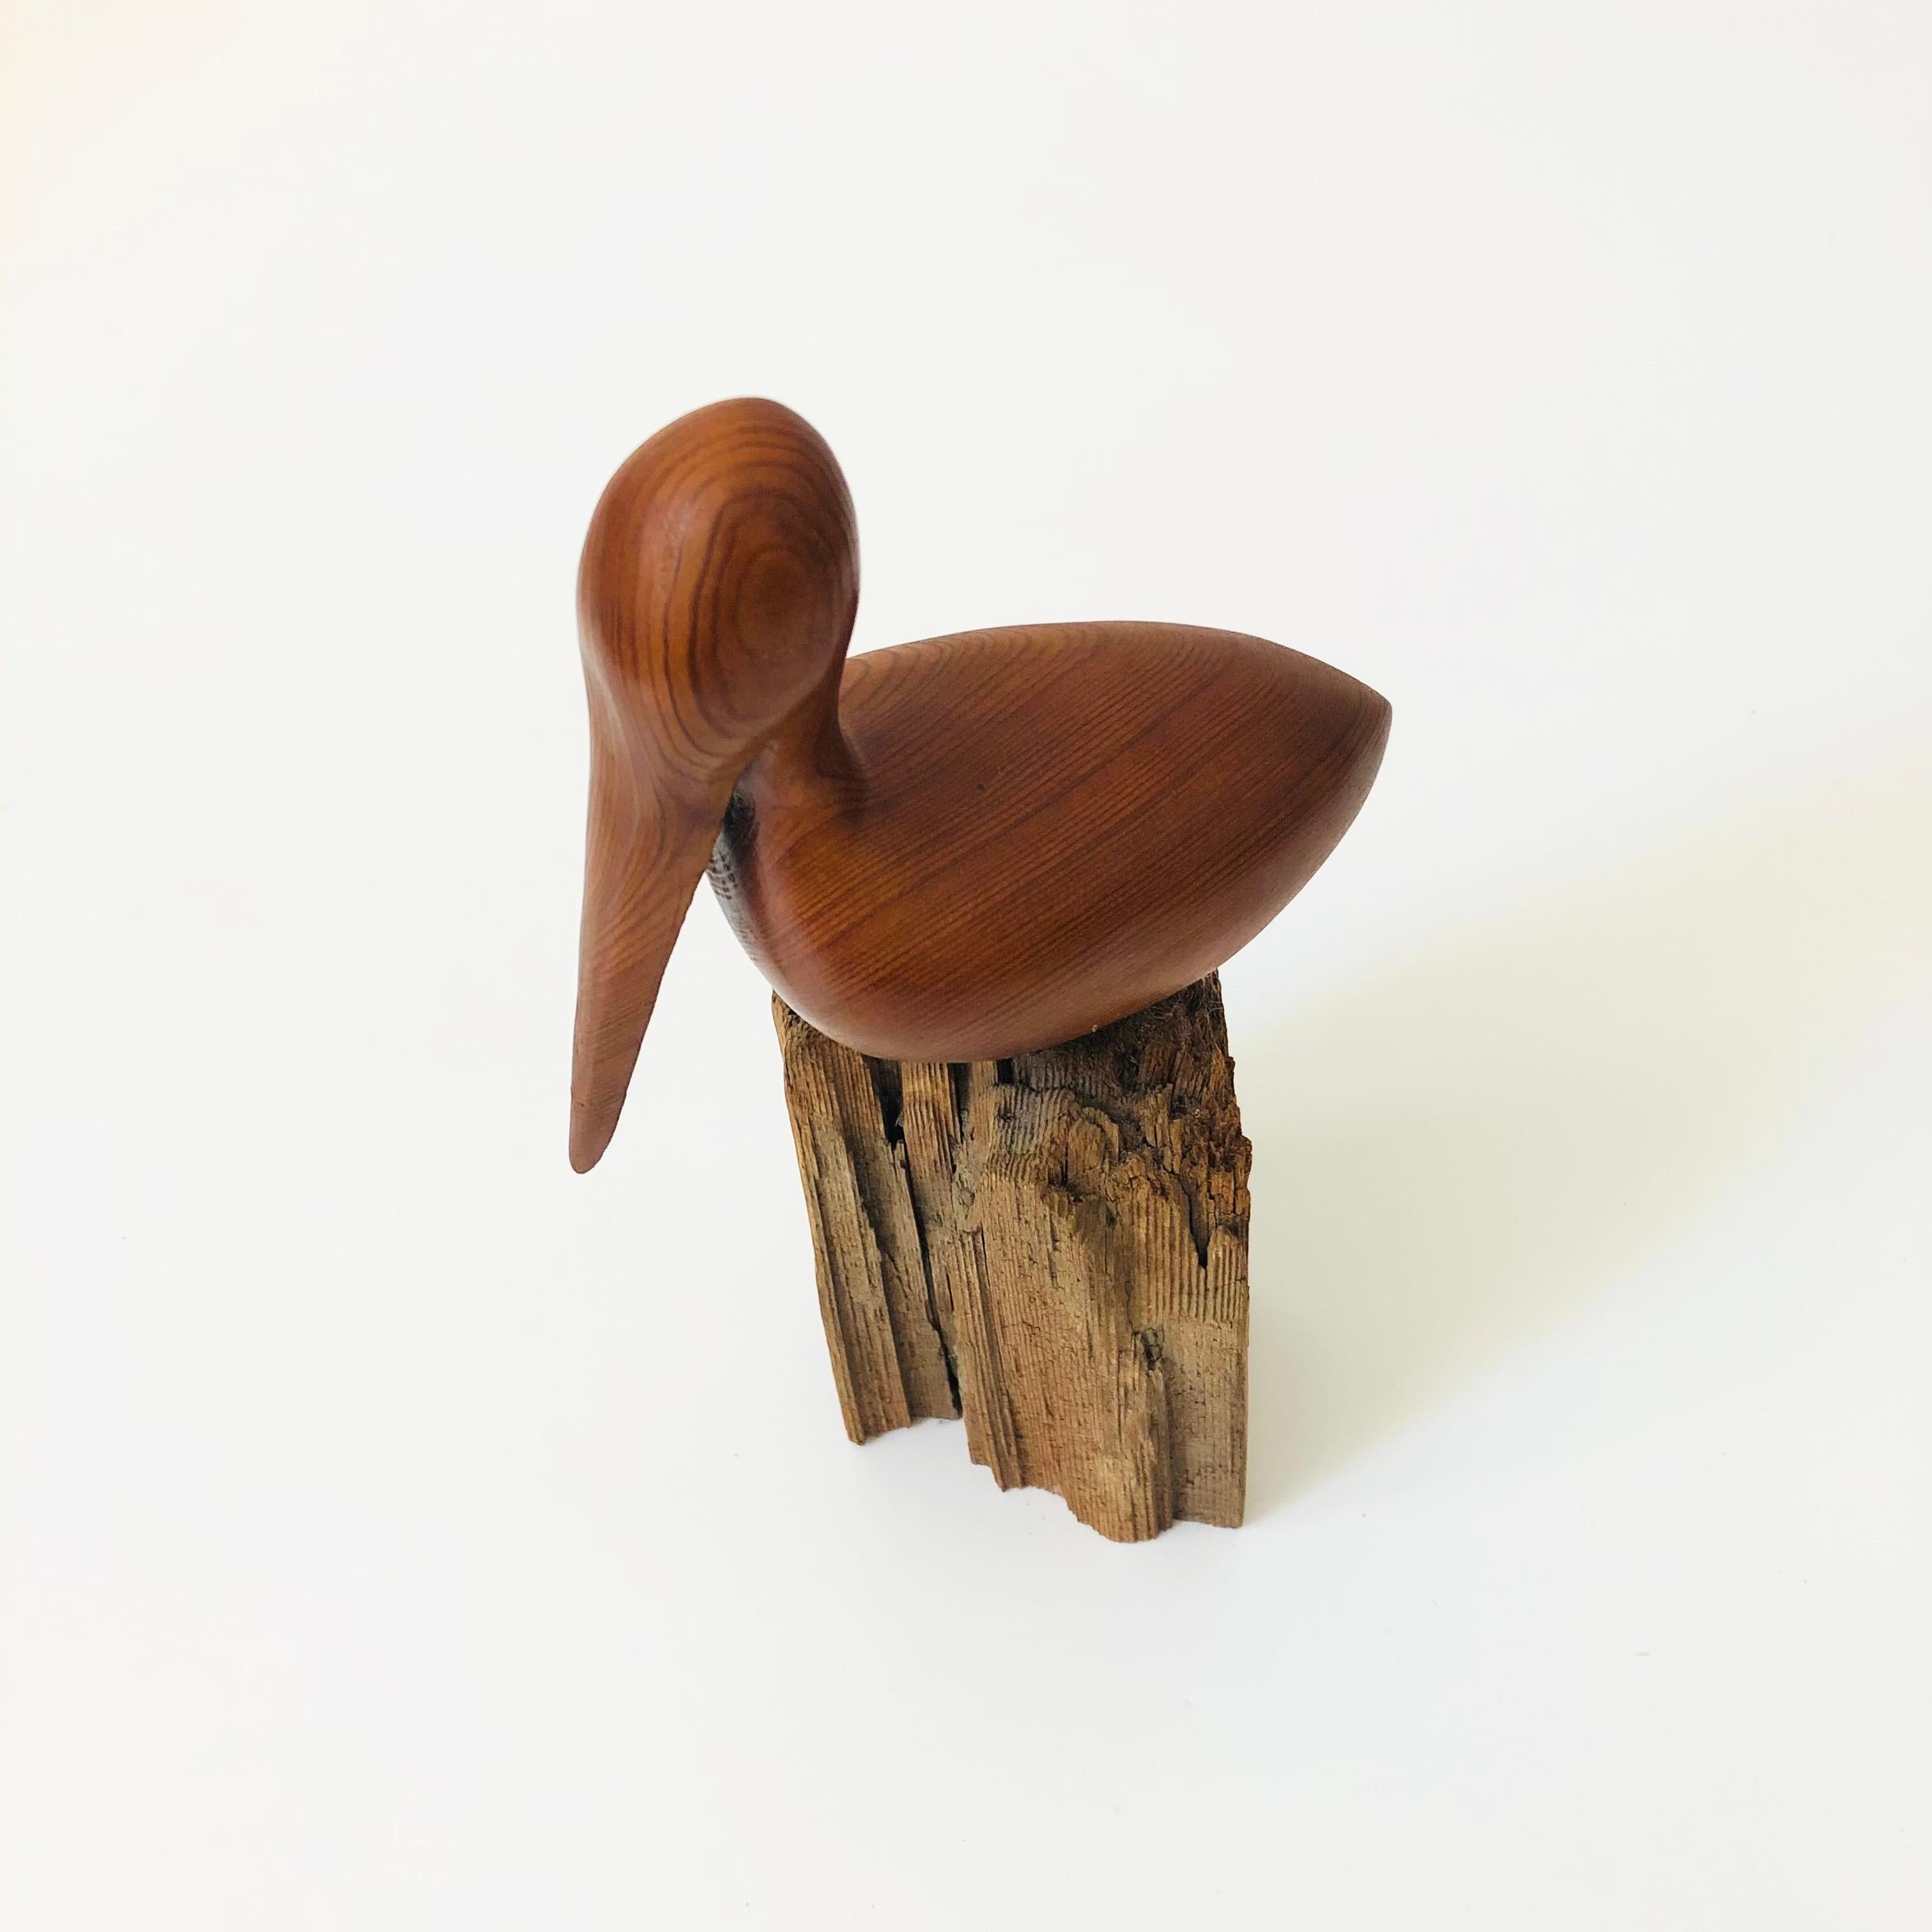 A vintage carved wood pelican. Made of teak that has been carved smooth and mounted on a contrasting natural driftwood base. Nice simple minimalist shape. Signed on the base 